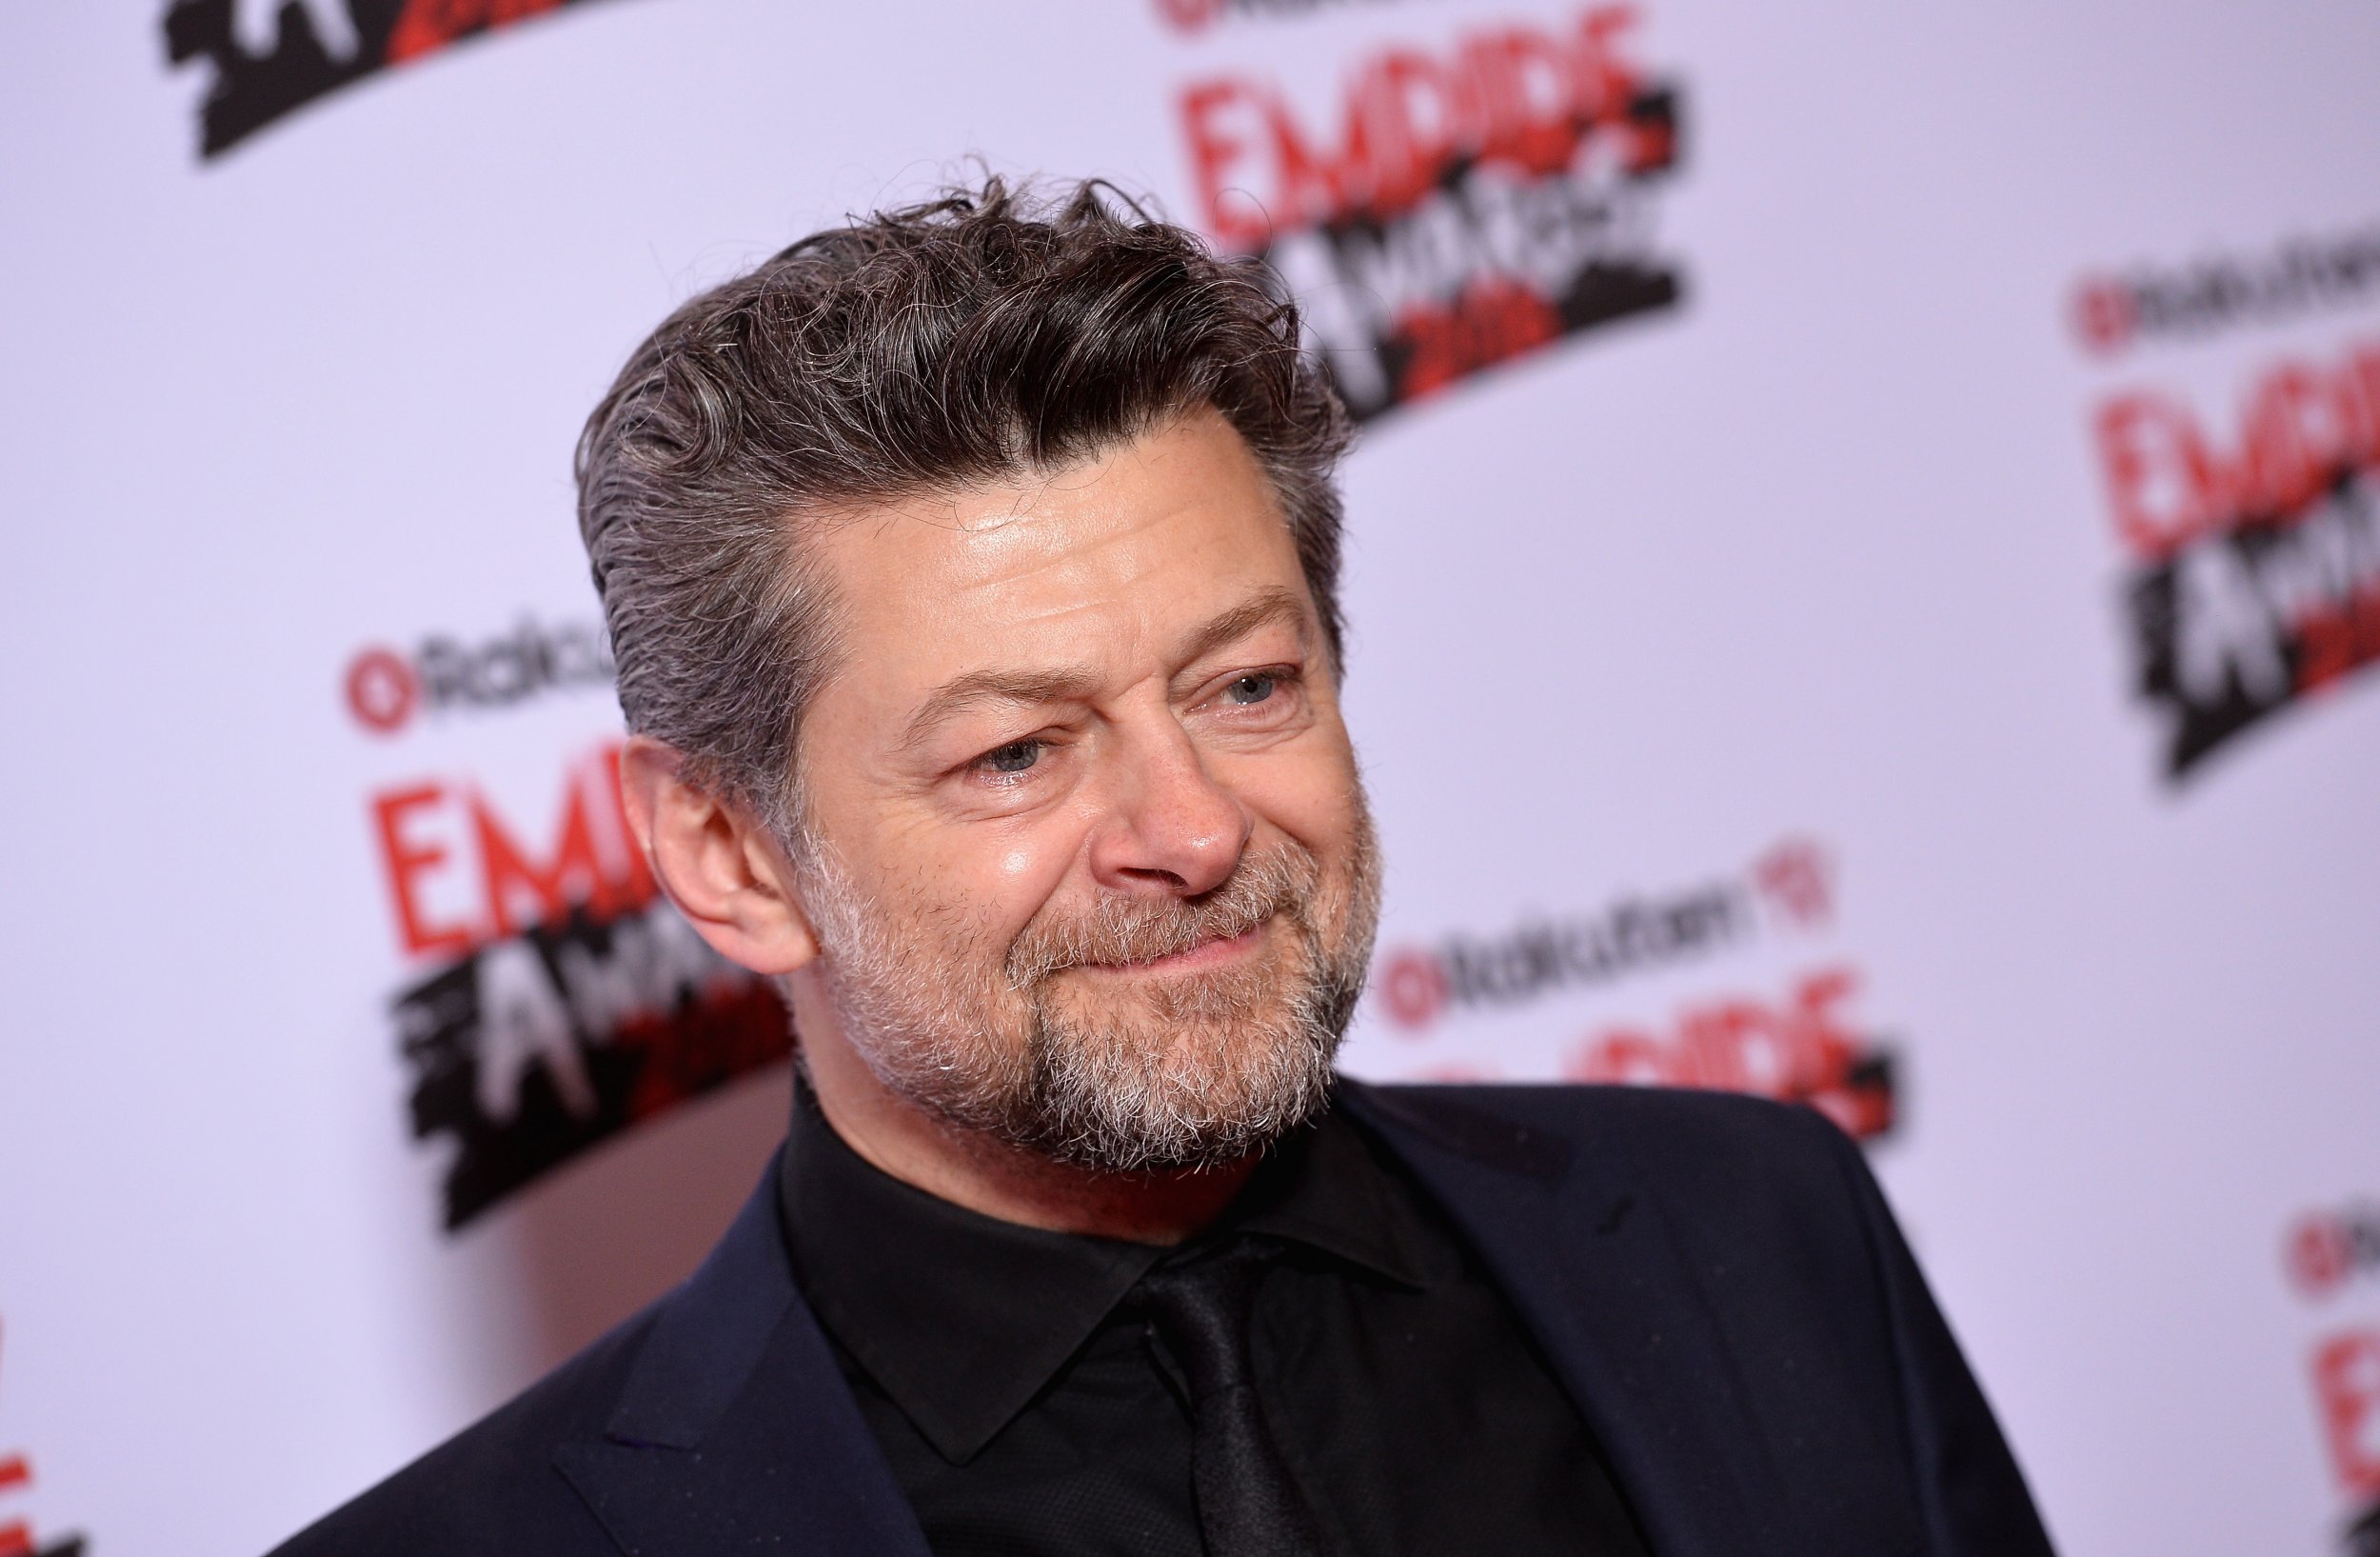 LOTR': How Much Was Andy Serkis Paid To Bring Gollum To Life?